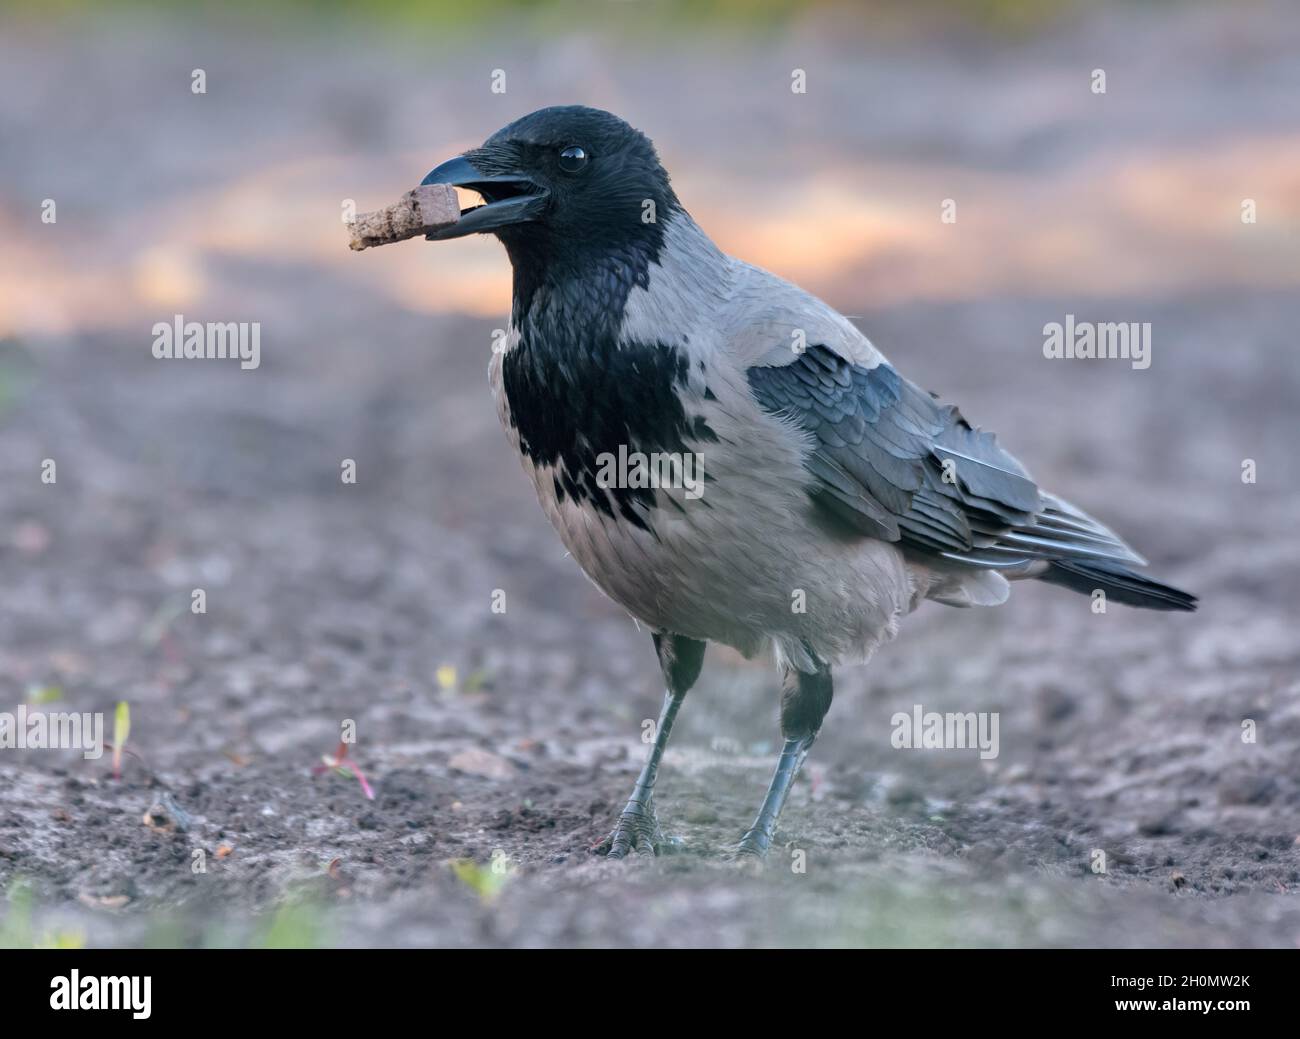 Hooded crow (Corvus cornix) posing on the ground with a piece of bread food in the beak Stock Photo